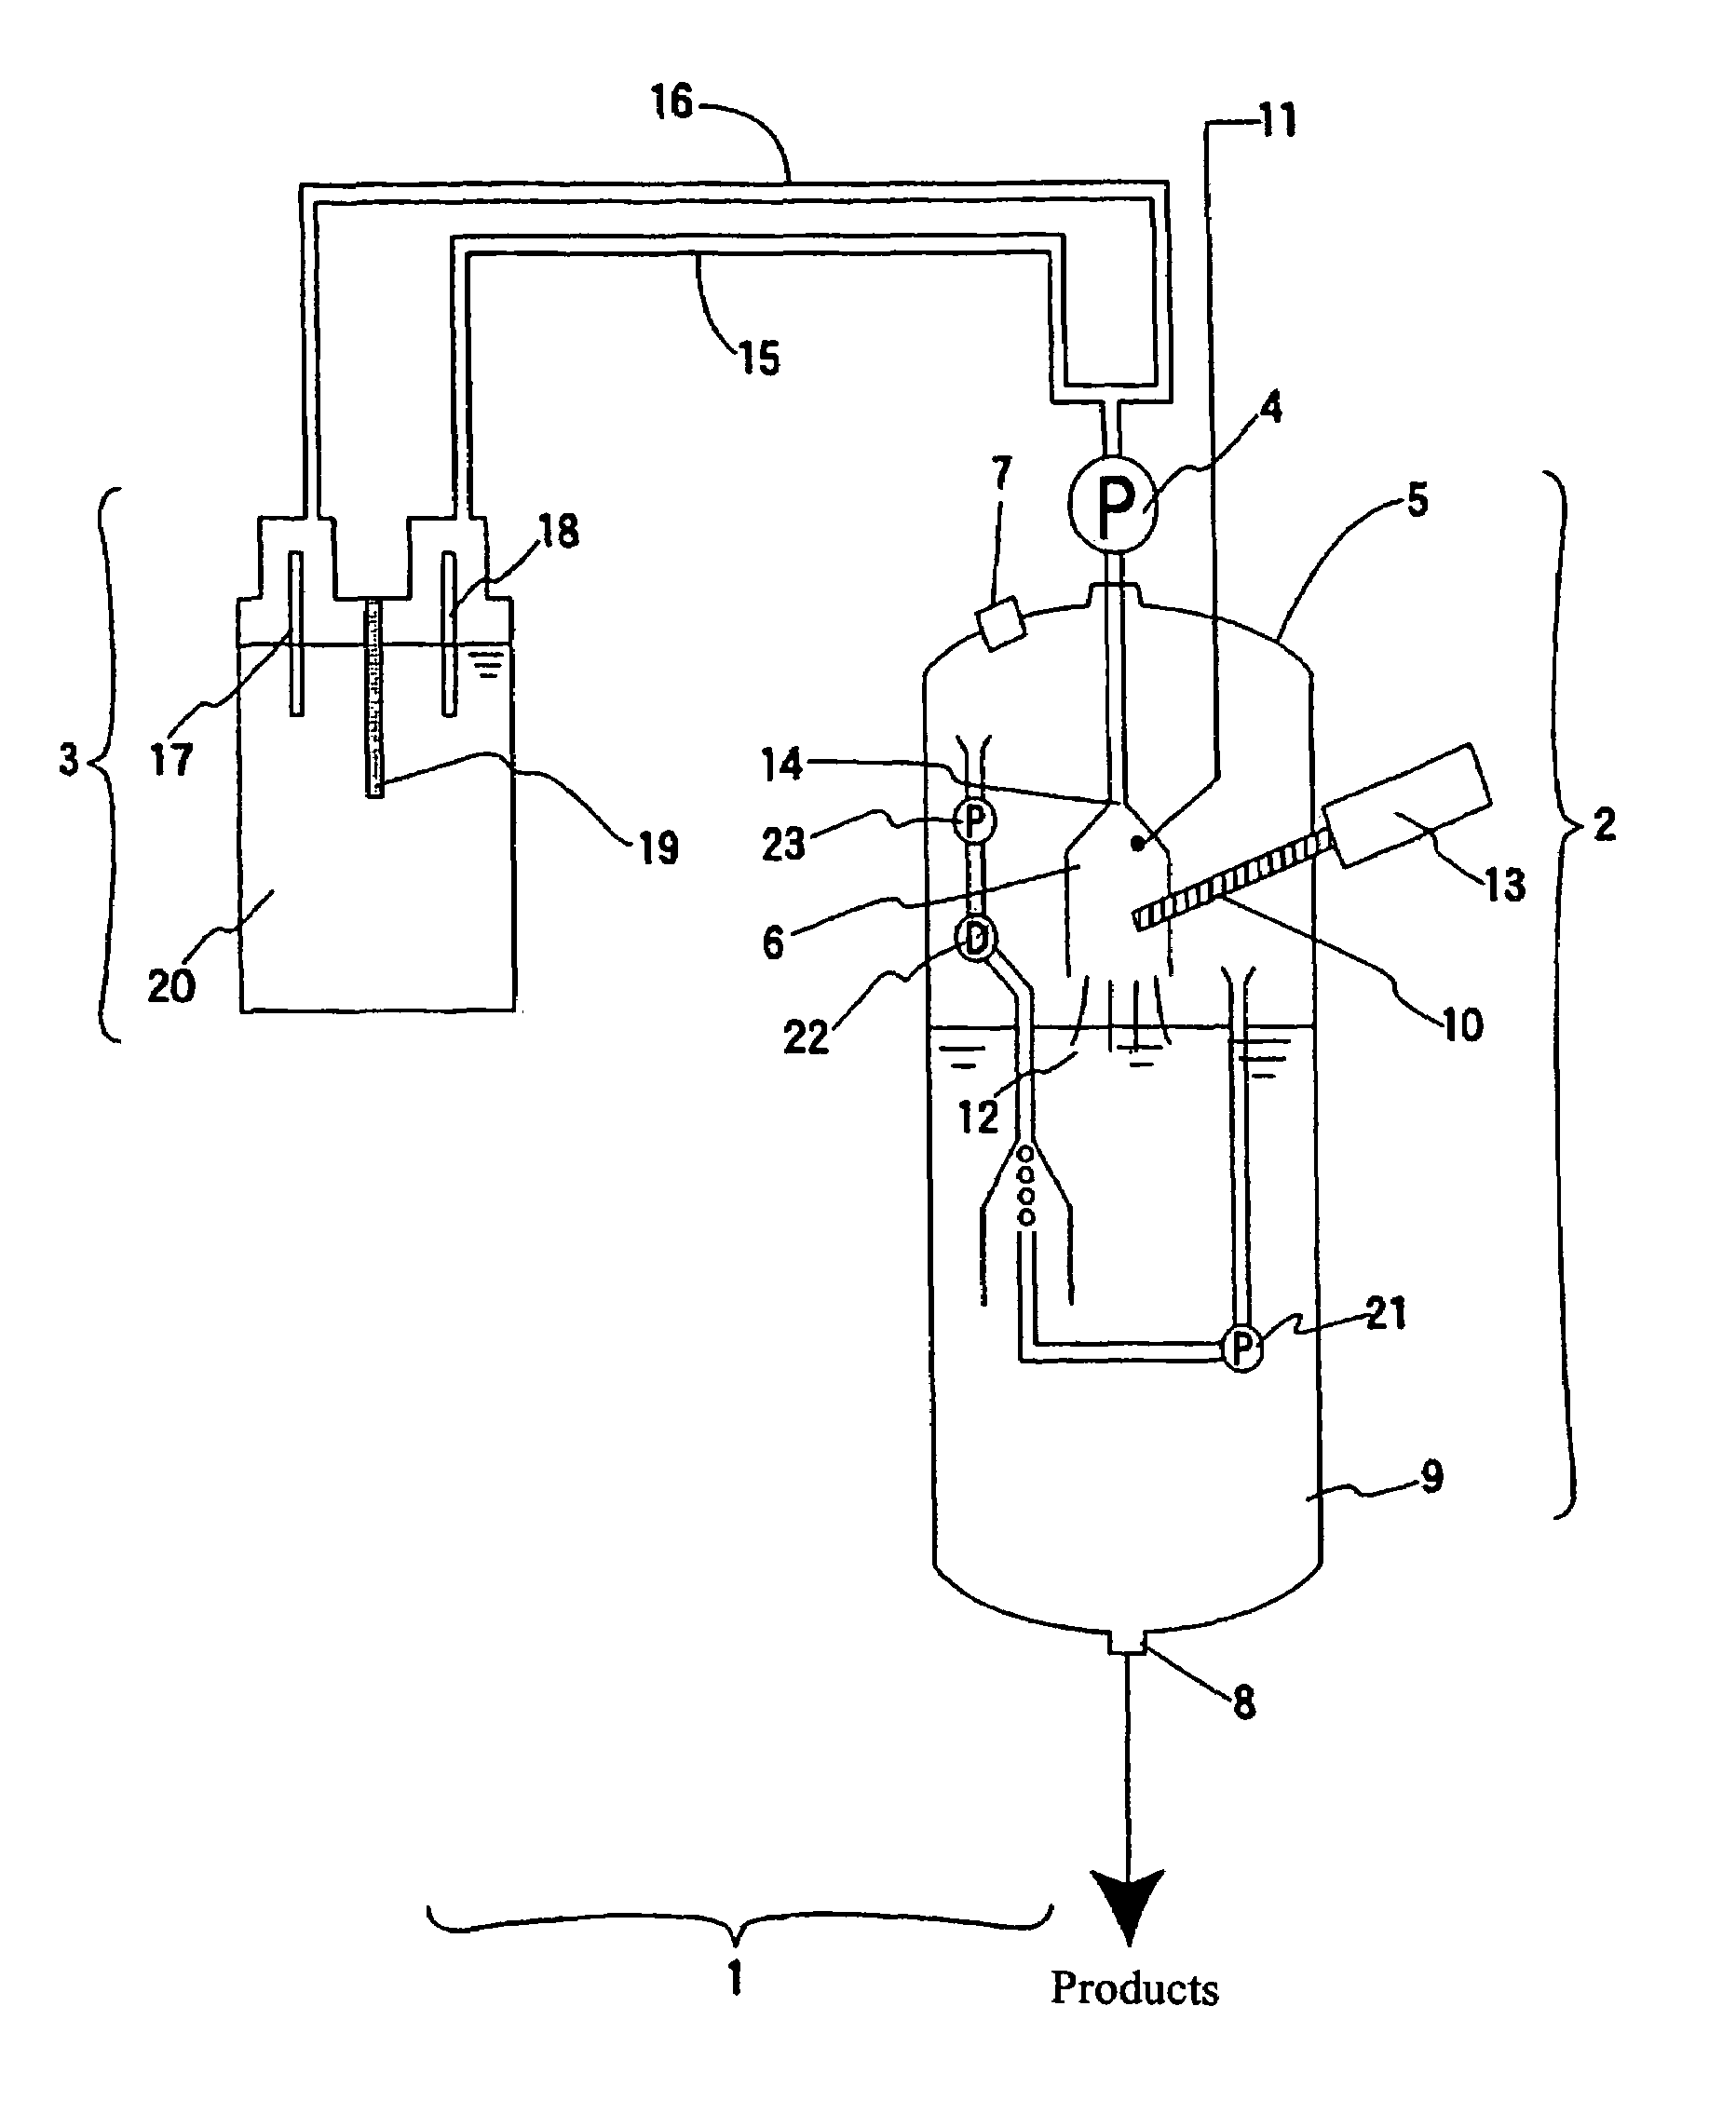 Method and device for manufacturing metallic particulates, and manufactured metallic particulates